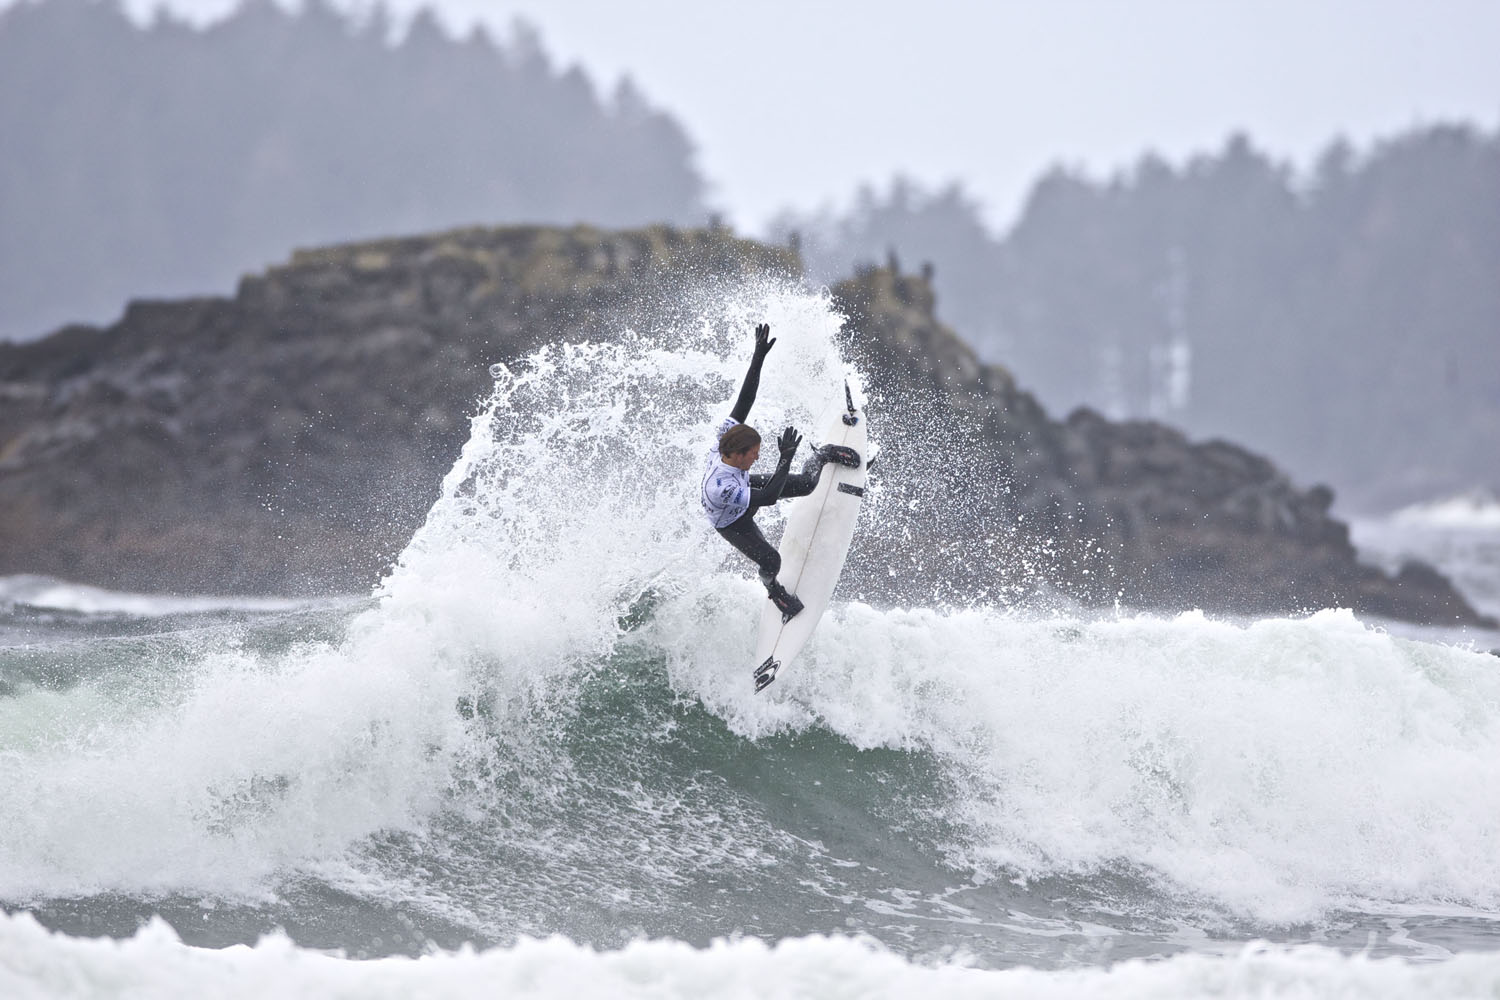 O'Neill Coldwater Classic Series 2011 - USA - Webclips - ALL Highlight Clips available!